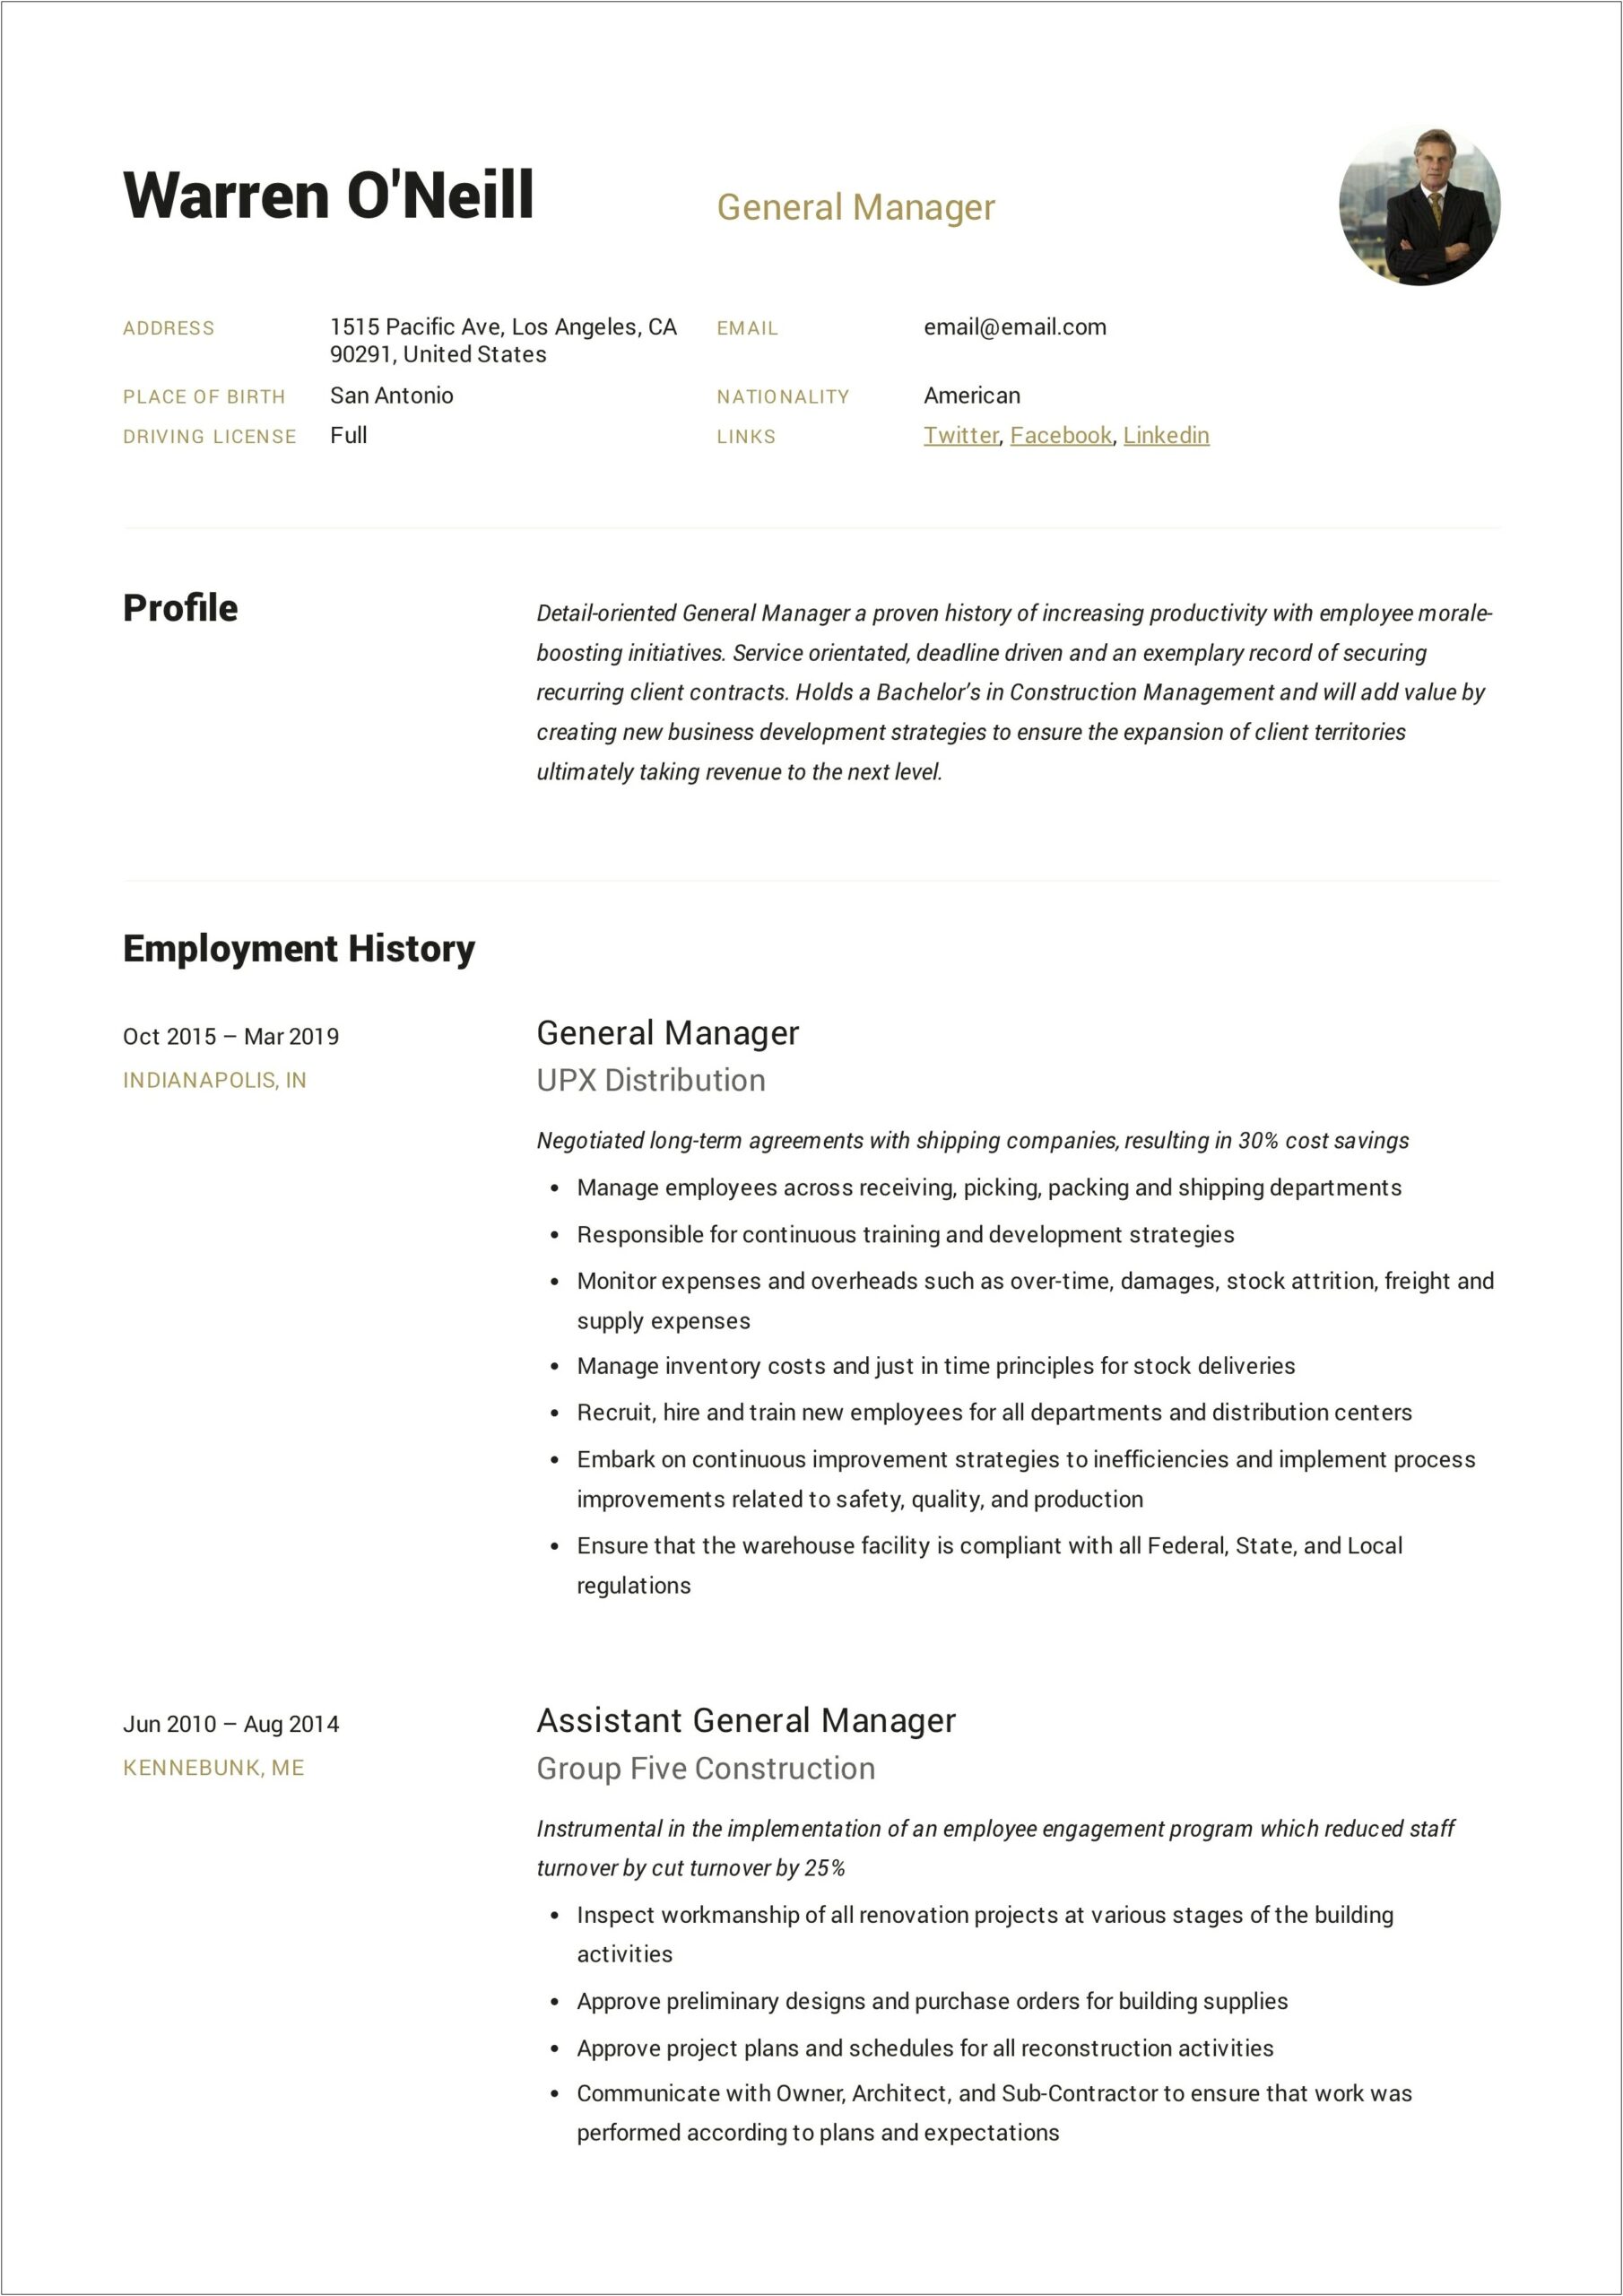 Generl Manager Skills And Abilities For Resume